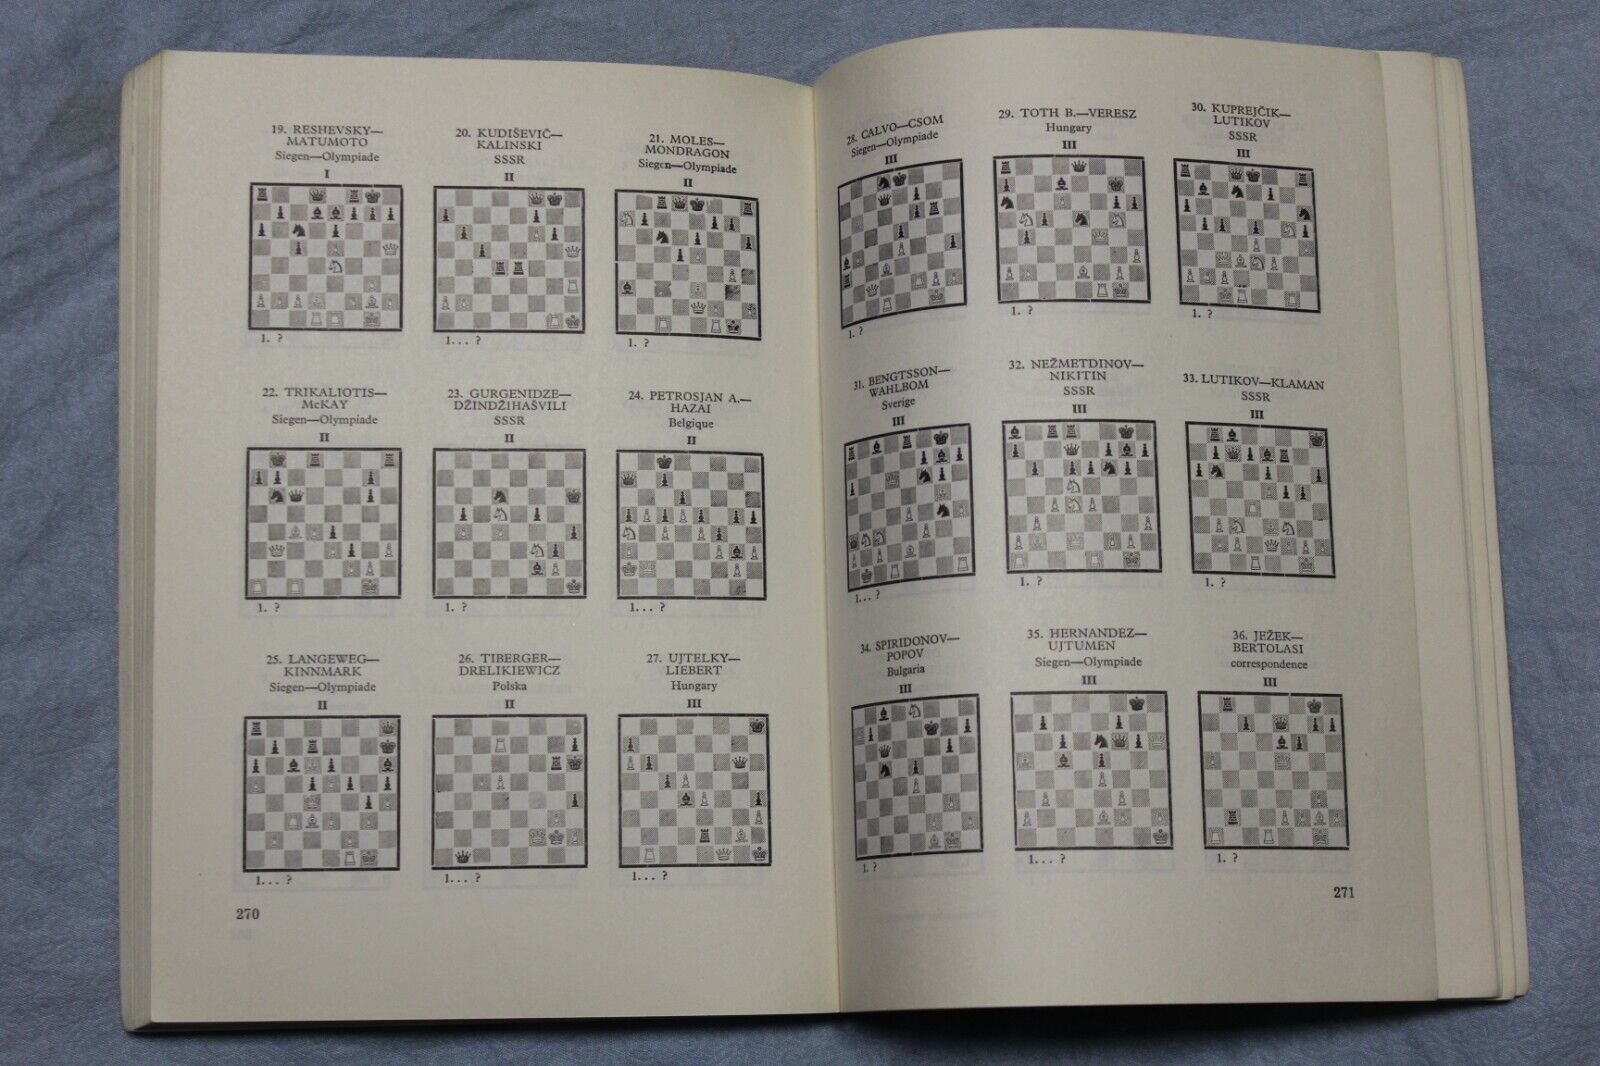 11117.Chess Book: signed by Yudovich, Chess Informant, Beograd 1971